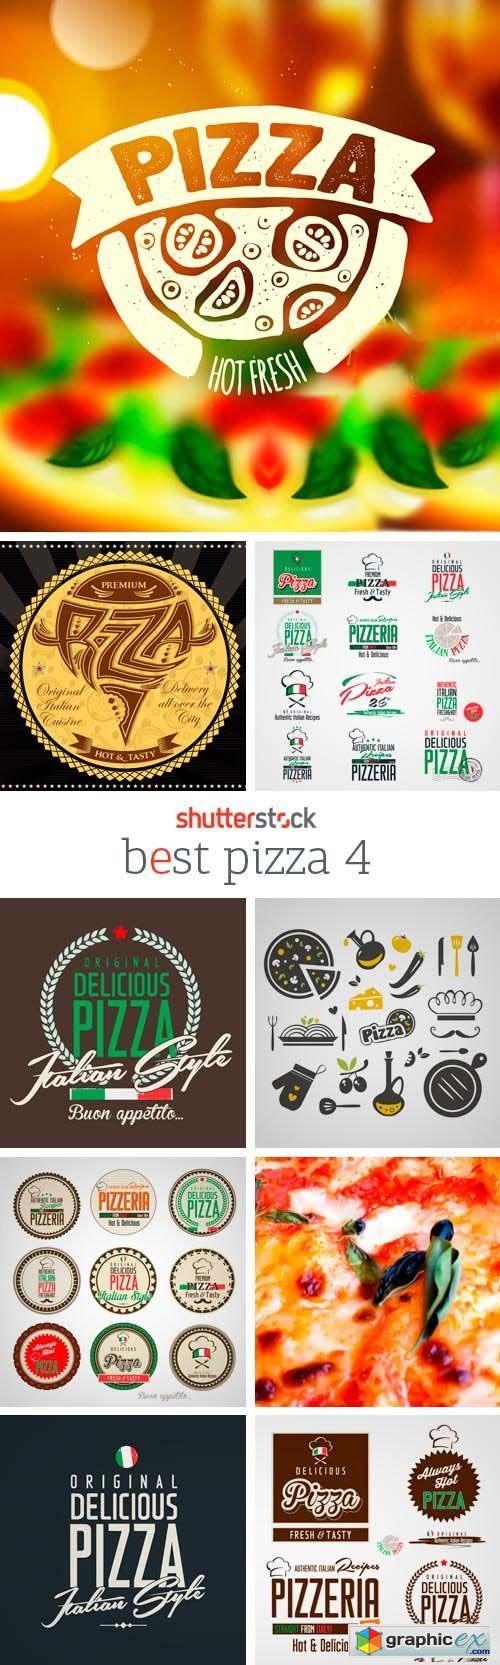 Amazing SS - Best Pizza 4, 25xEPS